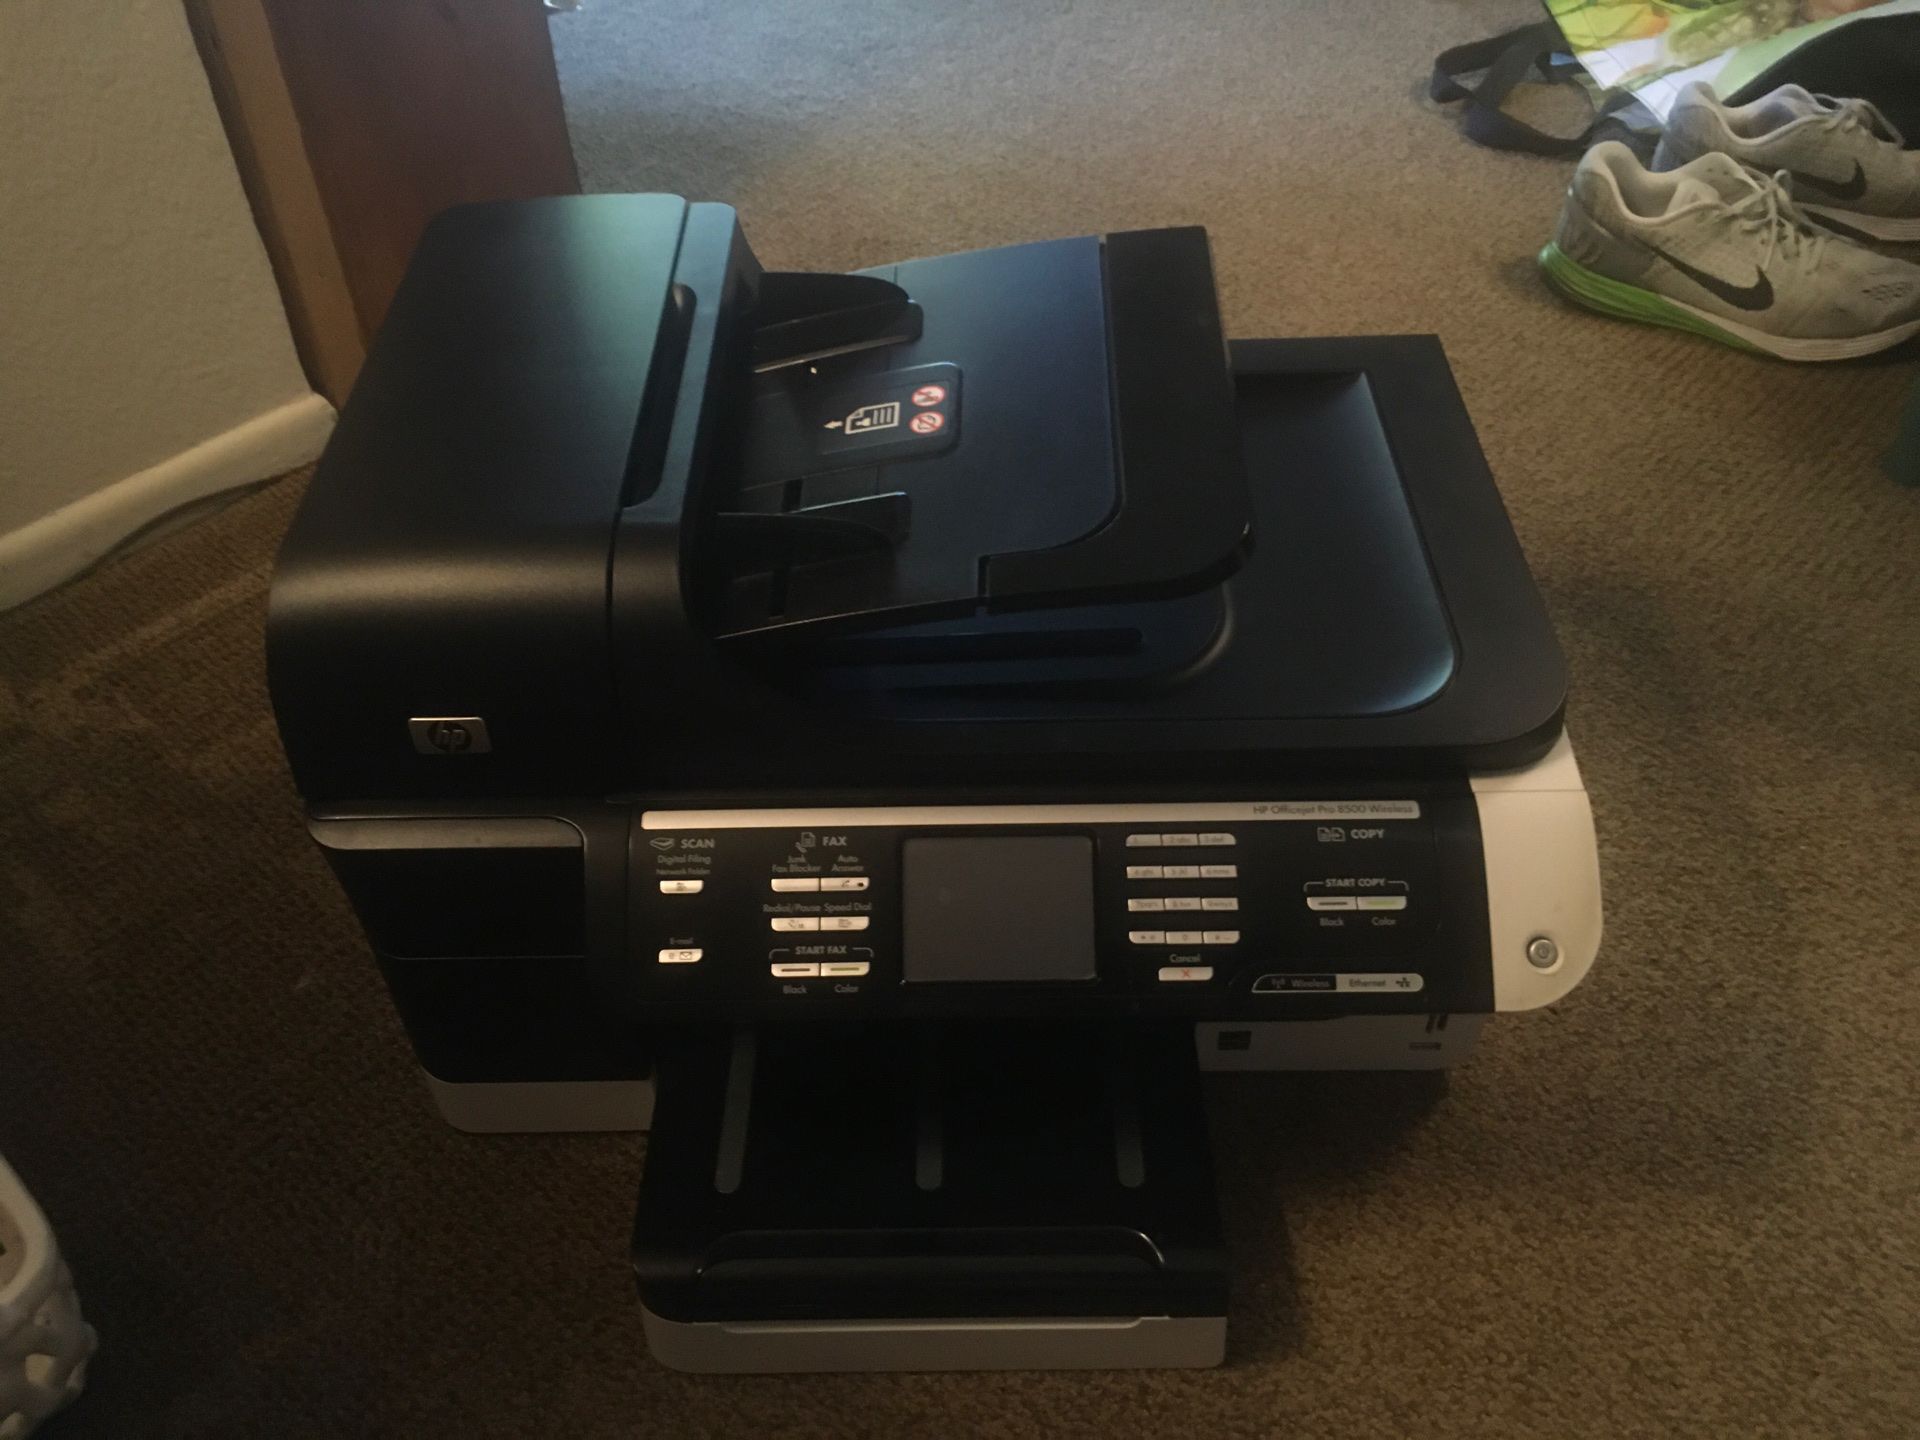 Hp Officejet Pro 8500 Wireless All In One Printer A909g For Sale In Ontario Ca Offerup 9153